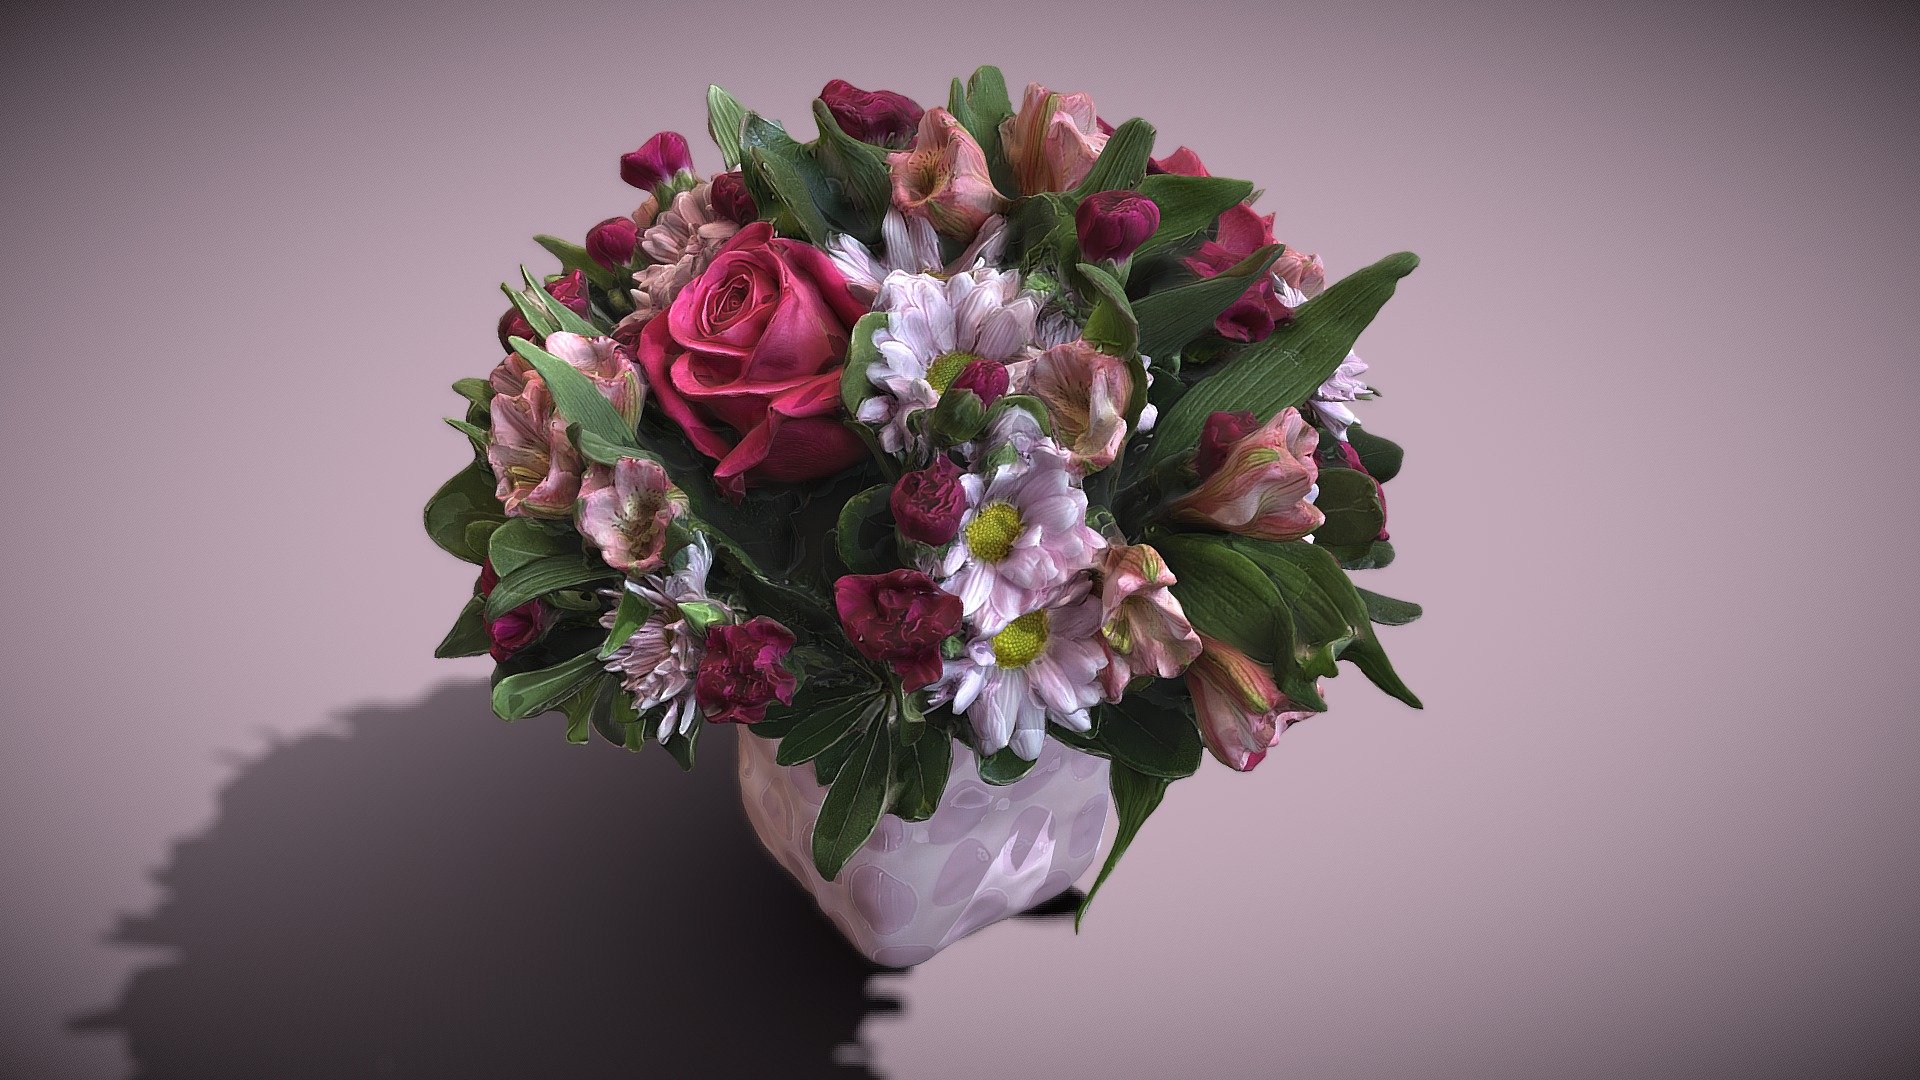 A beautiful pink and red flower arrangement in a pink vase - Pink and Red Flower Arrangement - Buy Royalty Free 3D model by ஜCIHIRISஜ (@crazy4creativity) 3d model